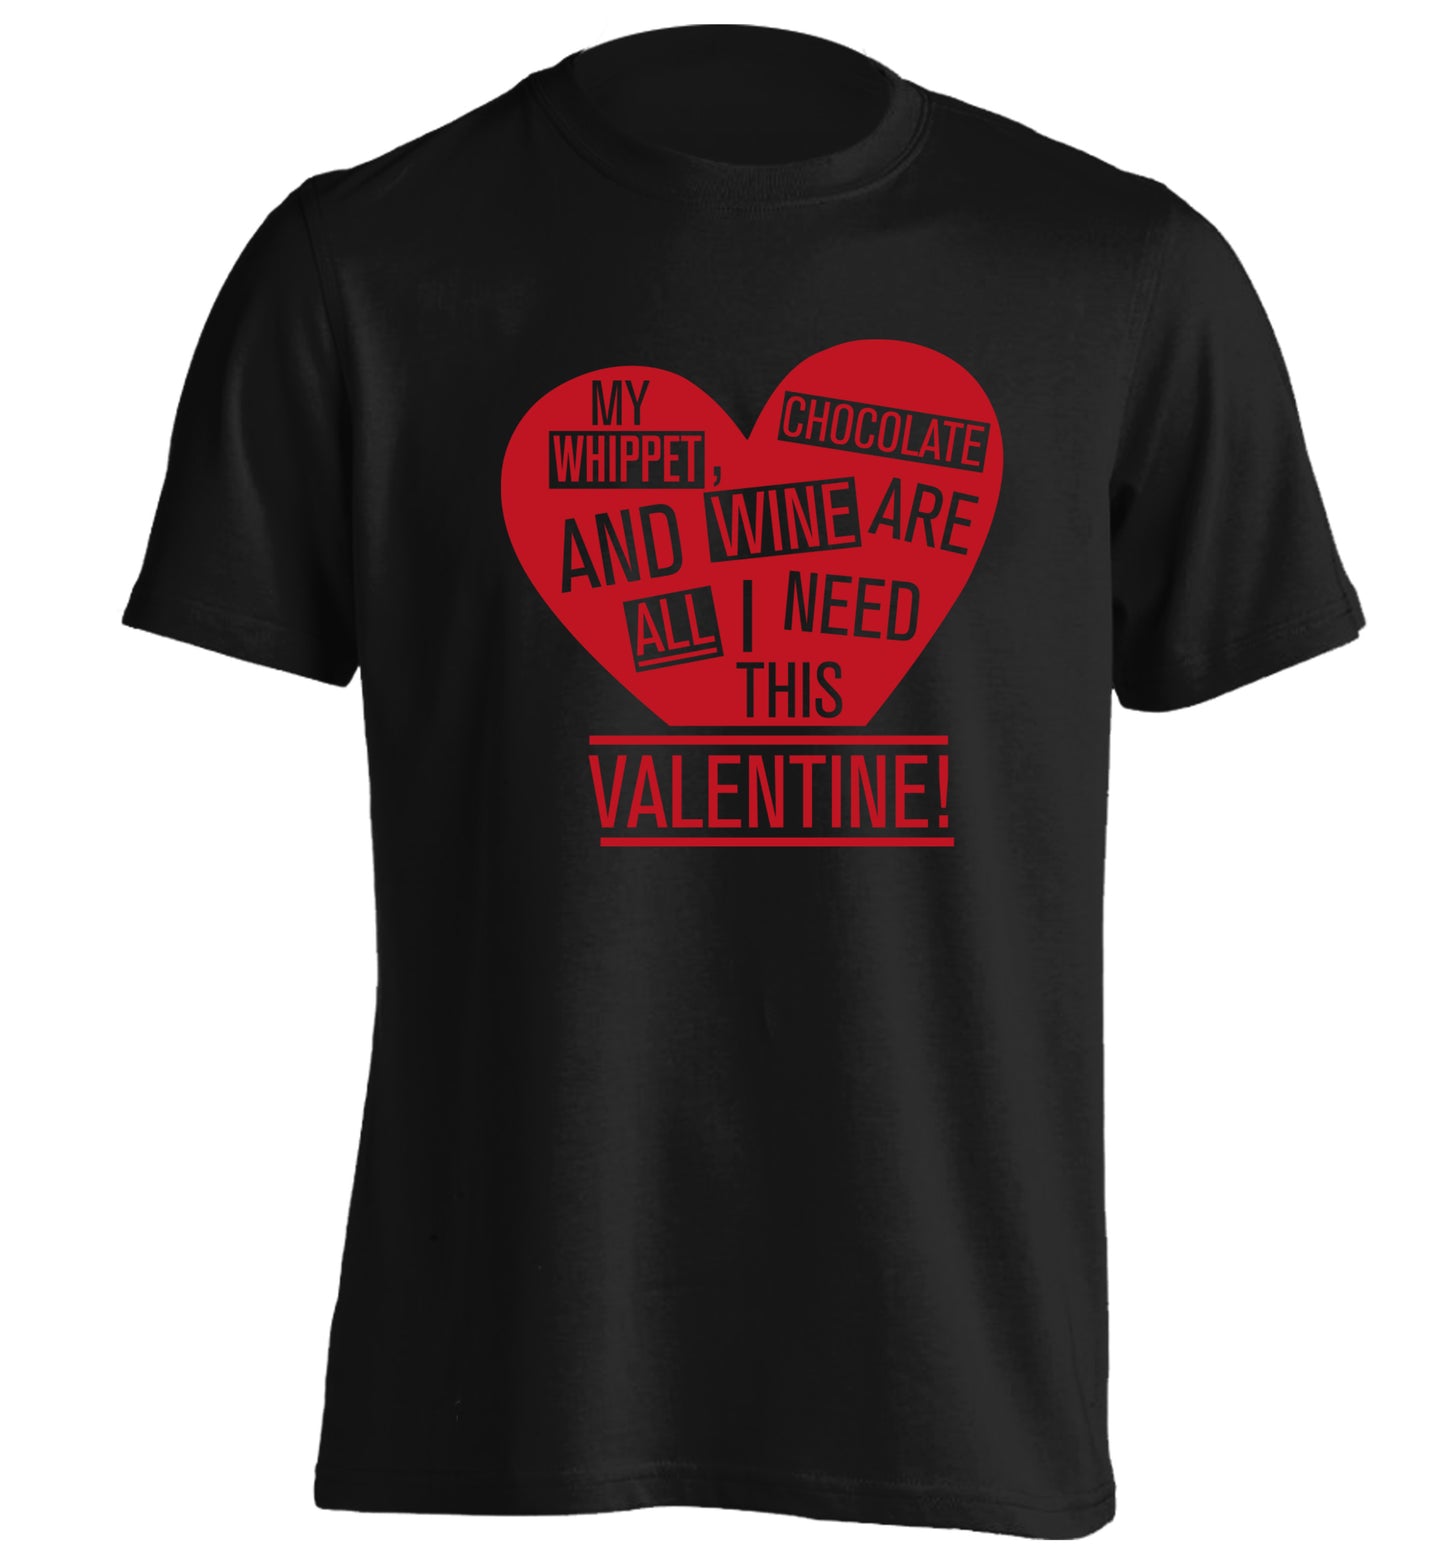 My whippet, chocolate and wine are all I need this valentine! adults unisex black Tshirt 2XL